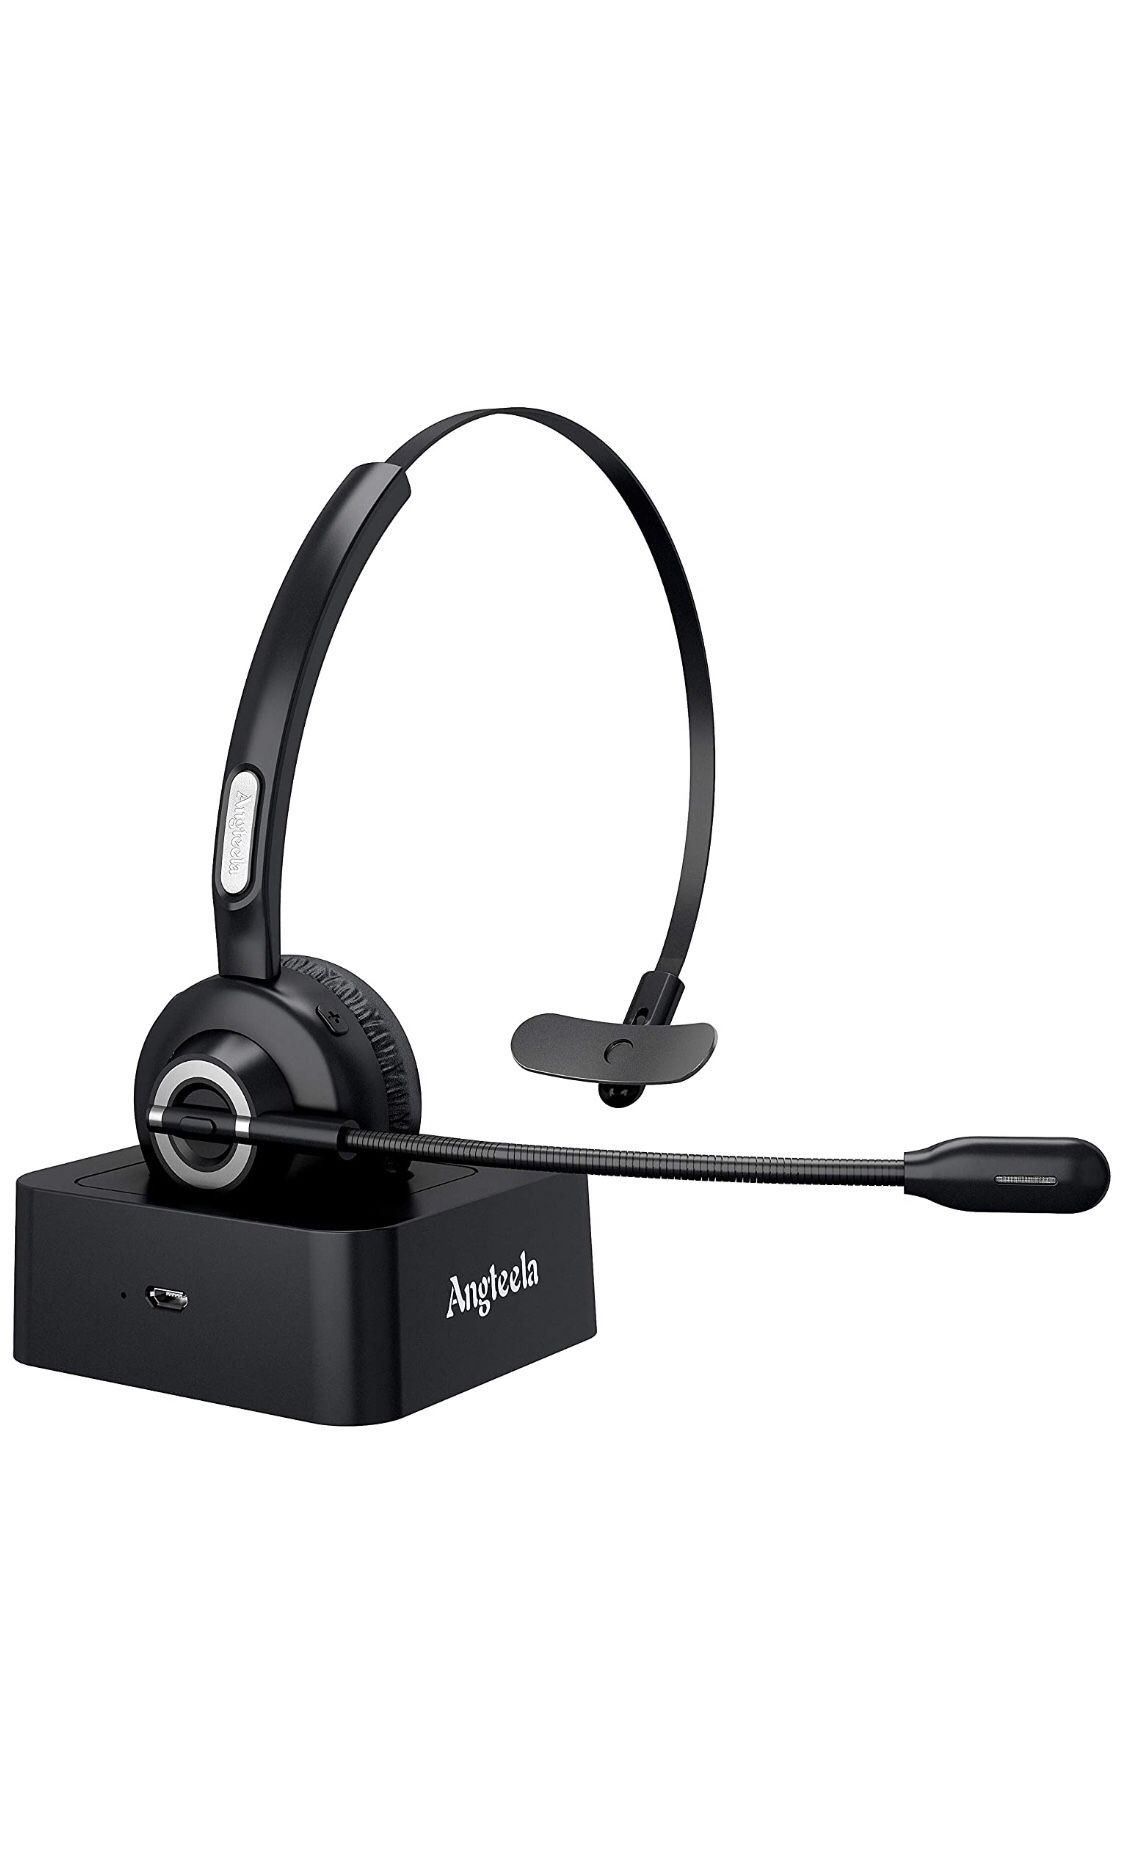 Bluetooth Headset, Angteela V5.0 Business Wireless Headset with Boom Mic, Suitable for Cell Phone/Tablet/Computer, Over The Head Hands Free Headset f